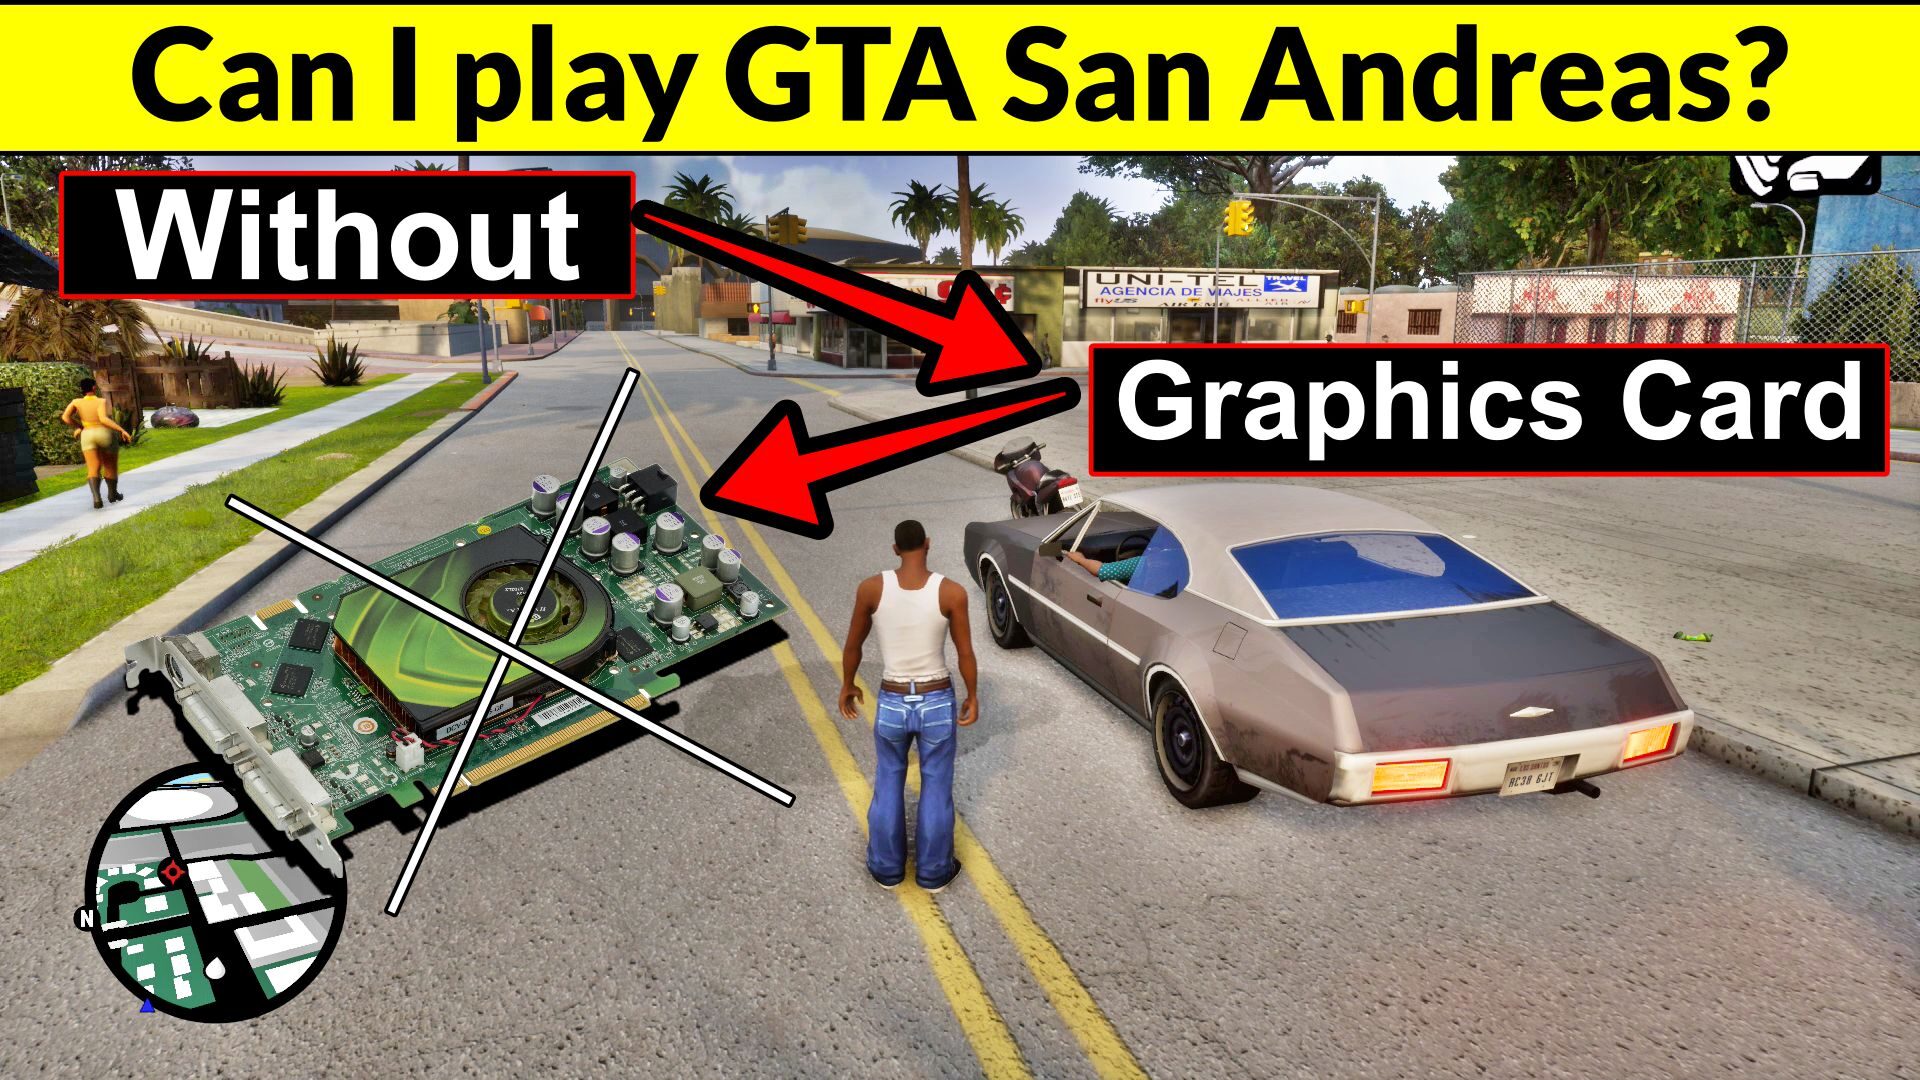 Can I play GTA San Andreas without graphics card